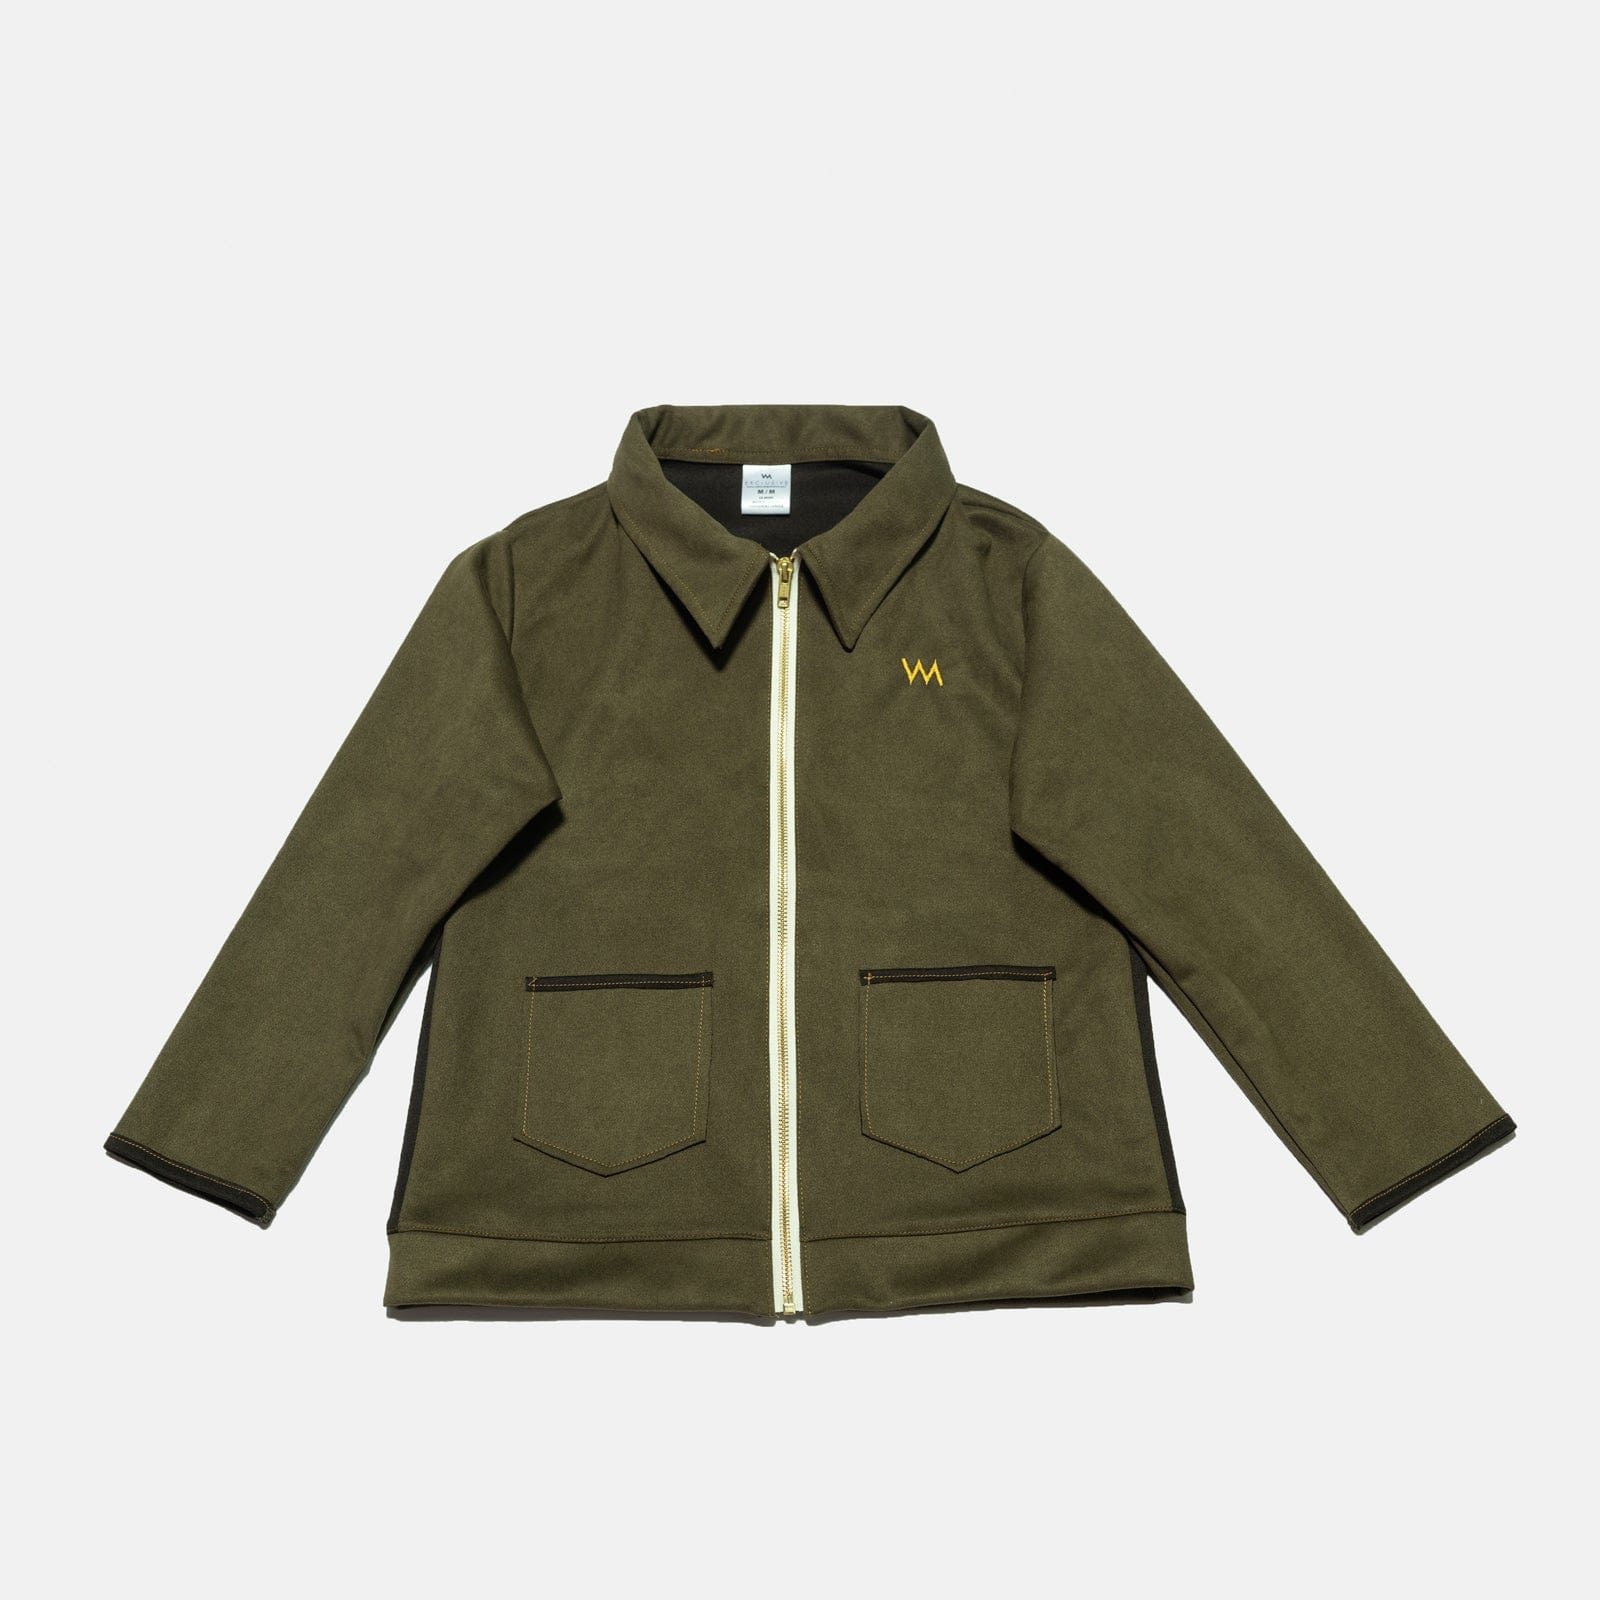 Chaqueta Impermeable Mujer Olive Green - TrendSeeker